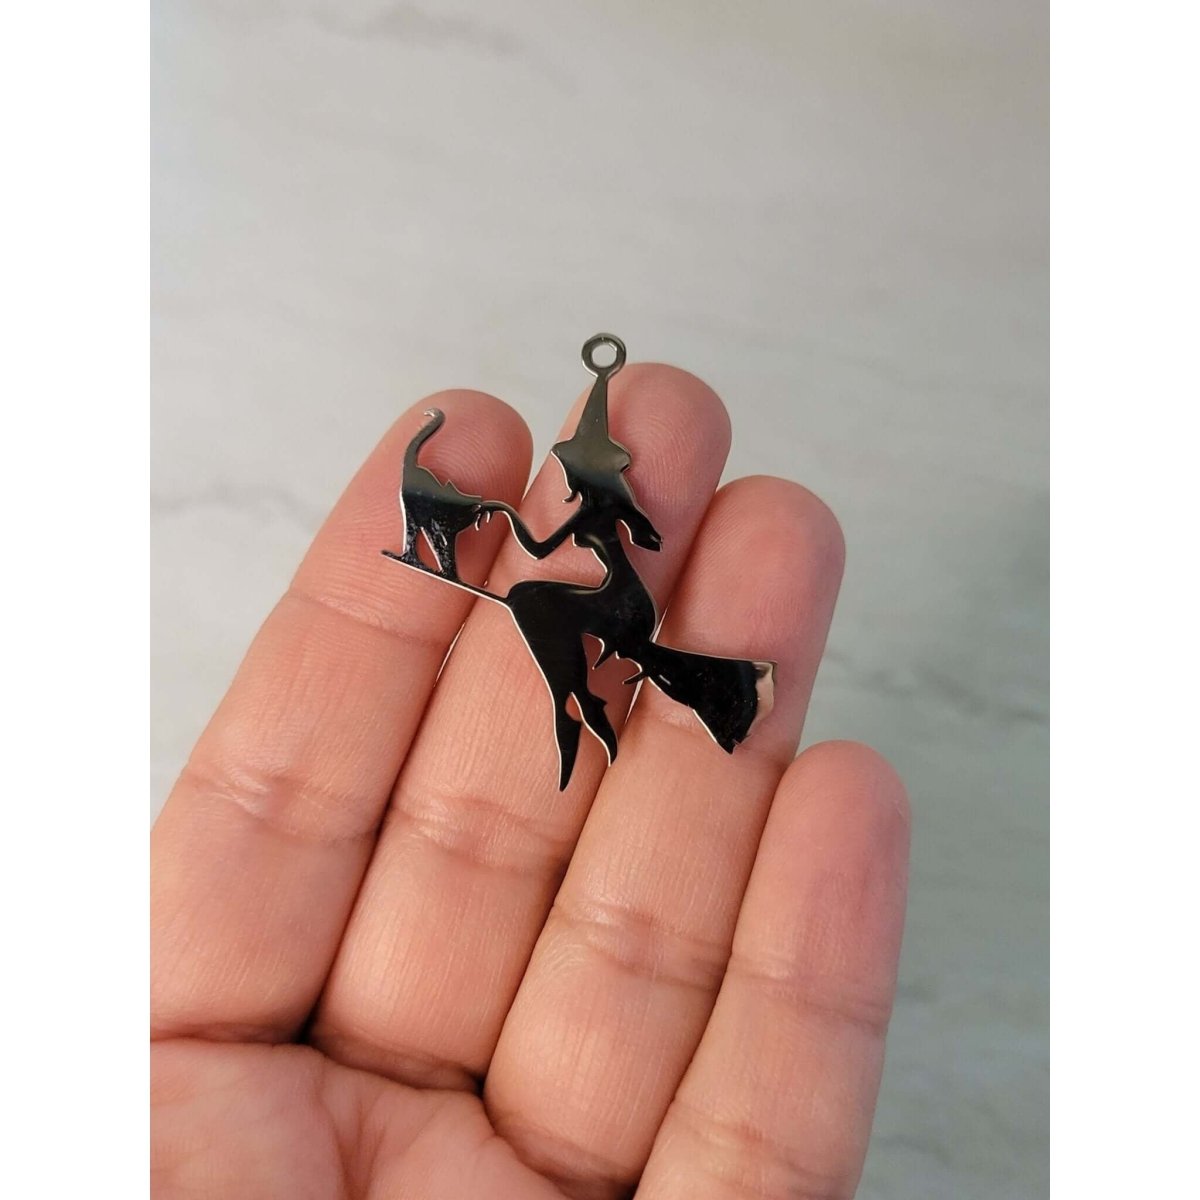 Sword Silver Charm , Sword Pendants Witchy Charms